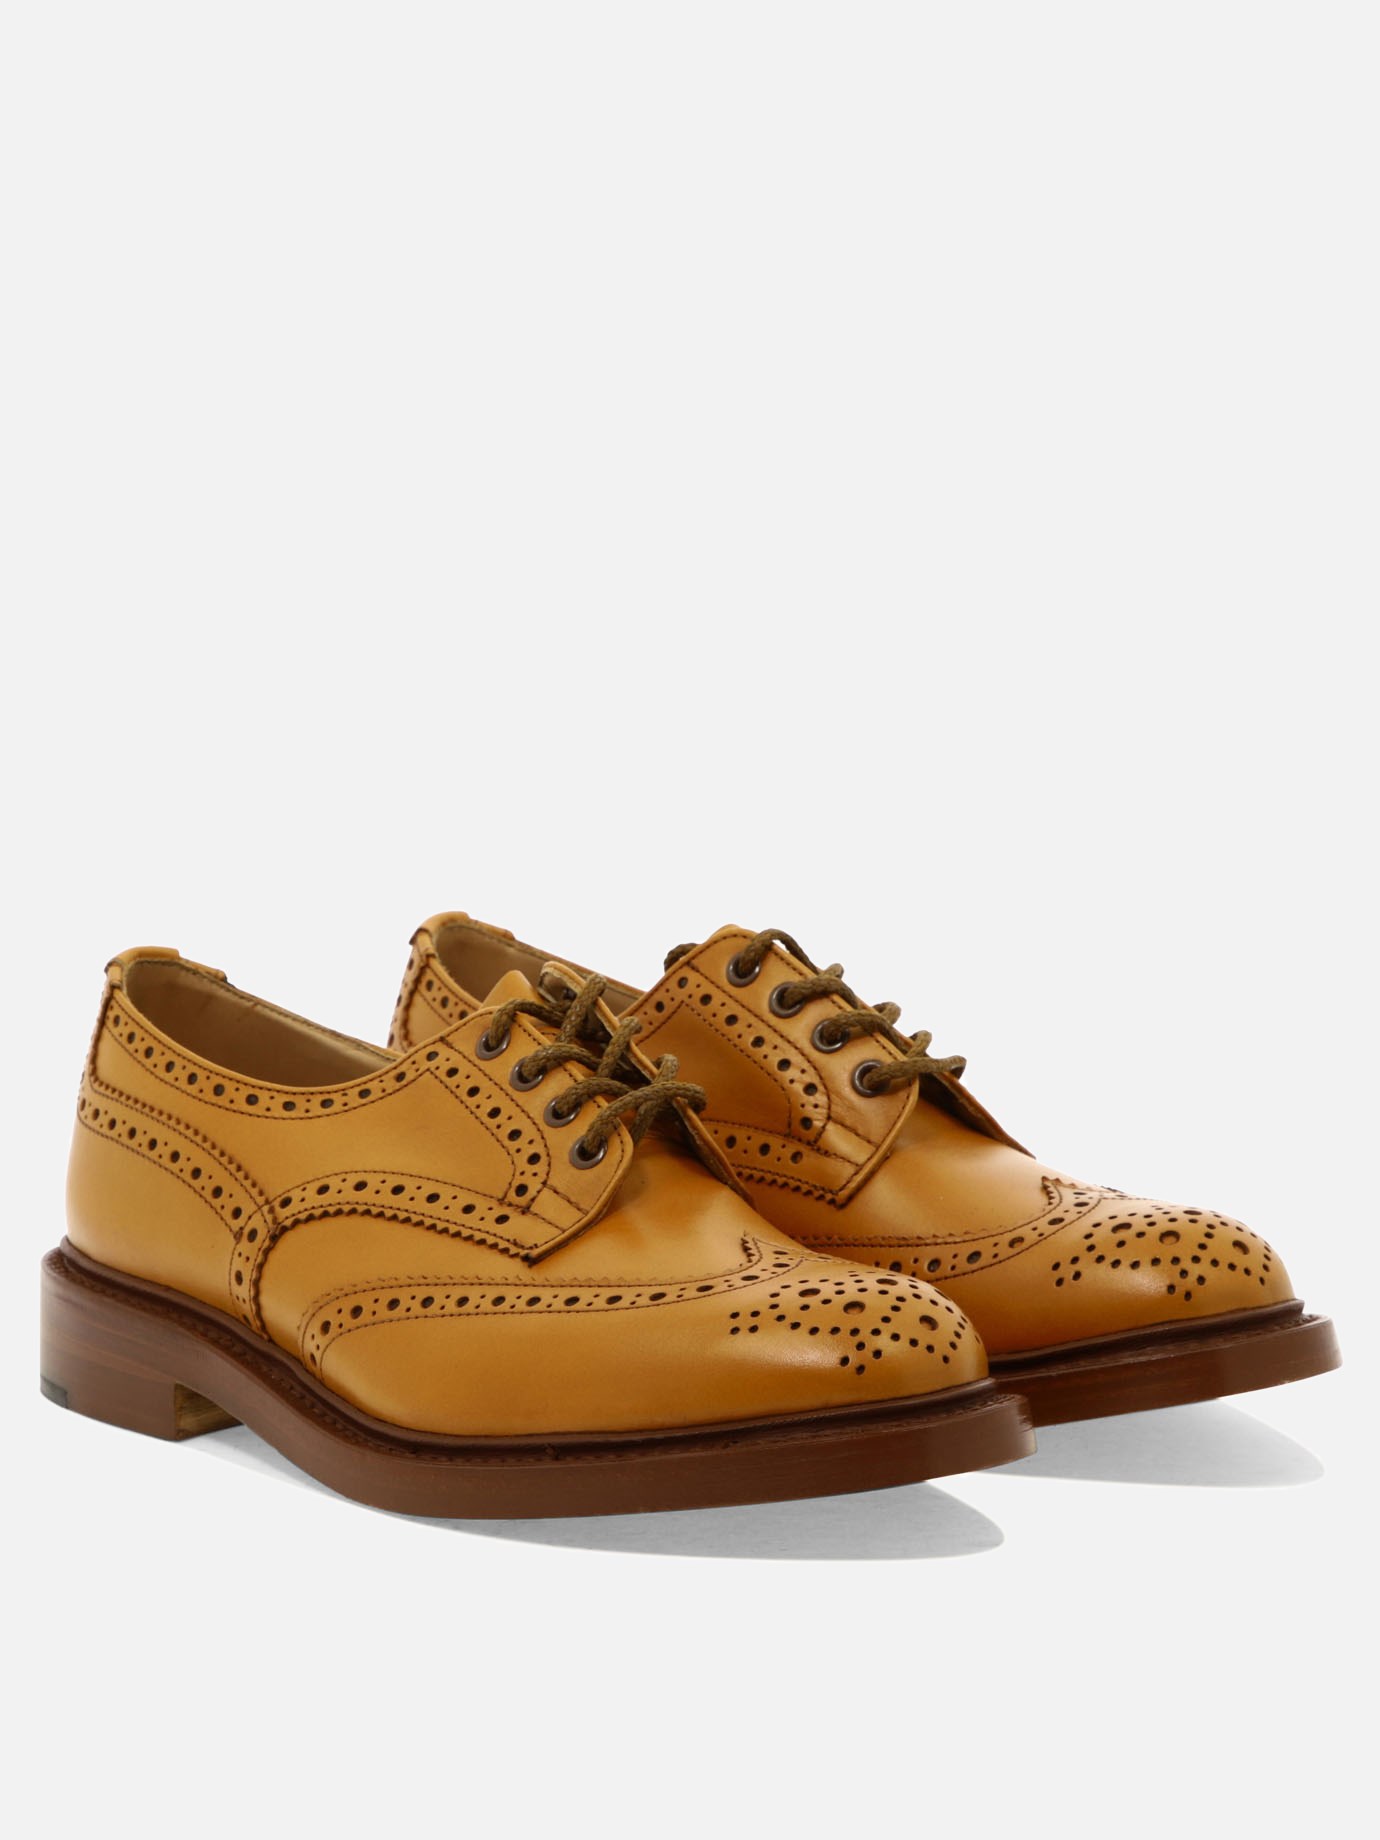  Bourton  lace-up shoes by Tricker's